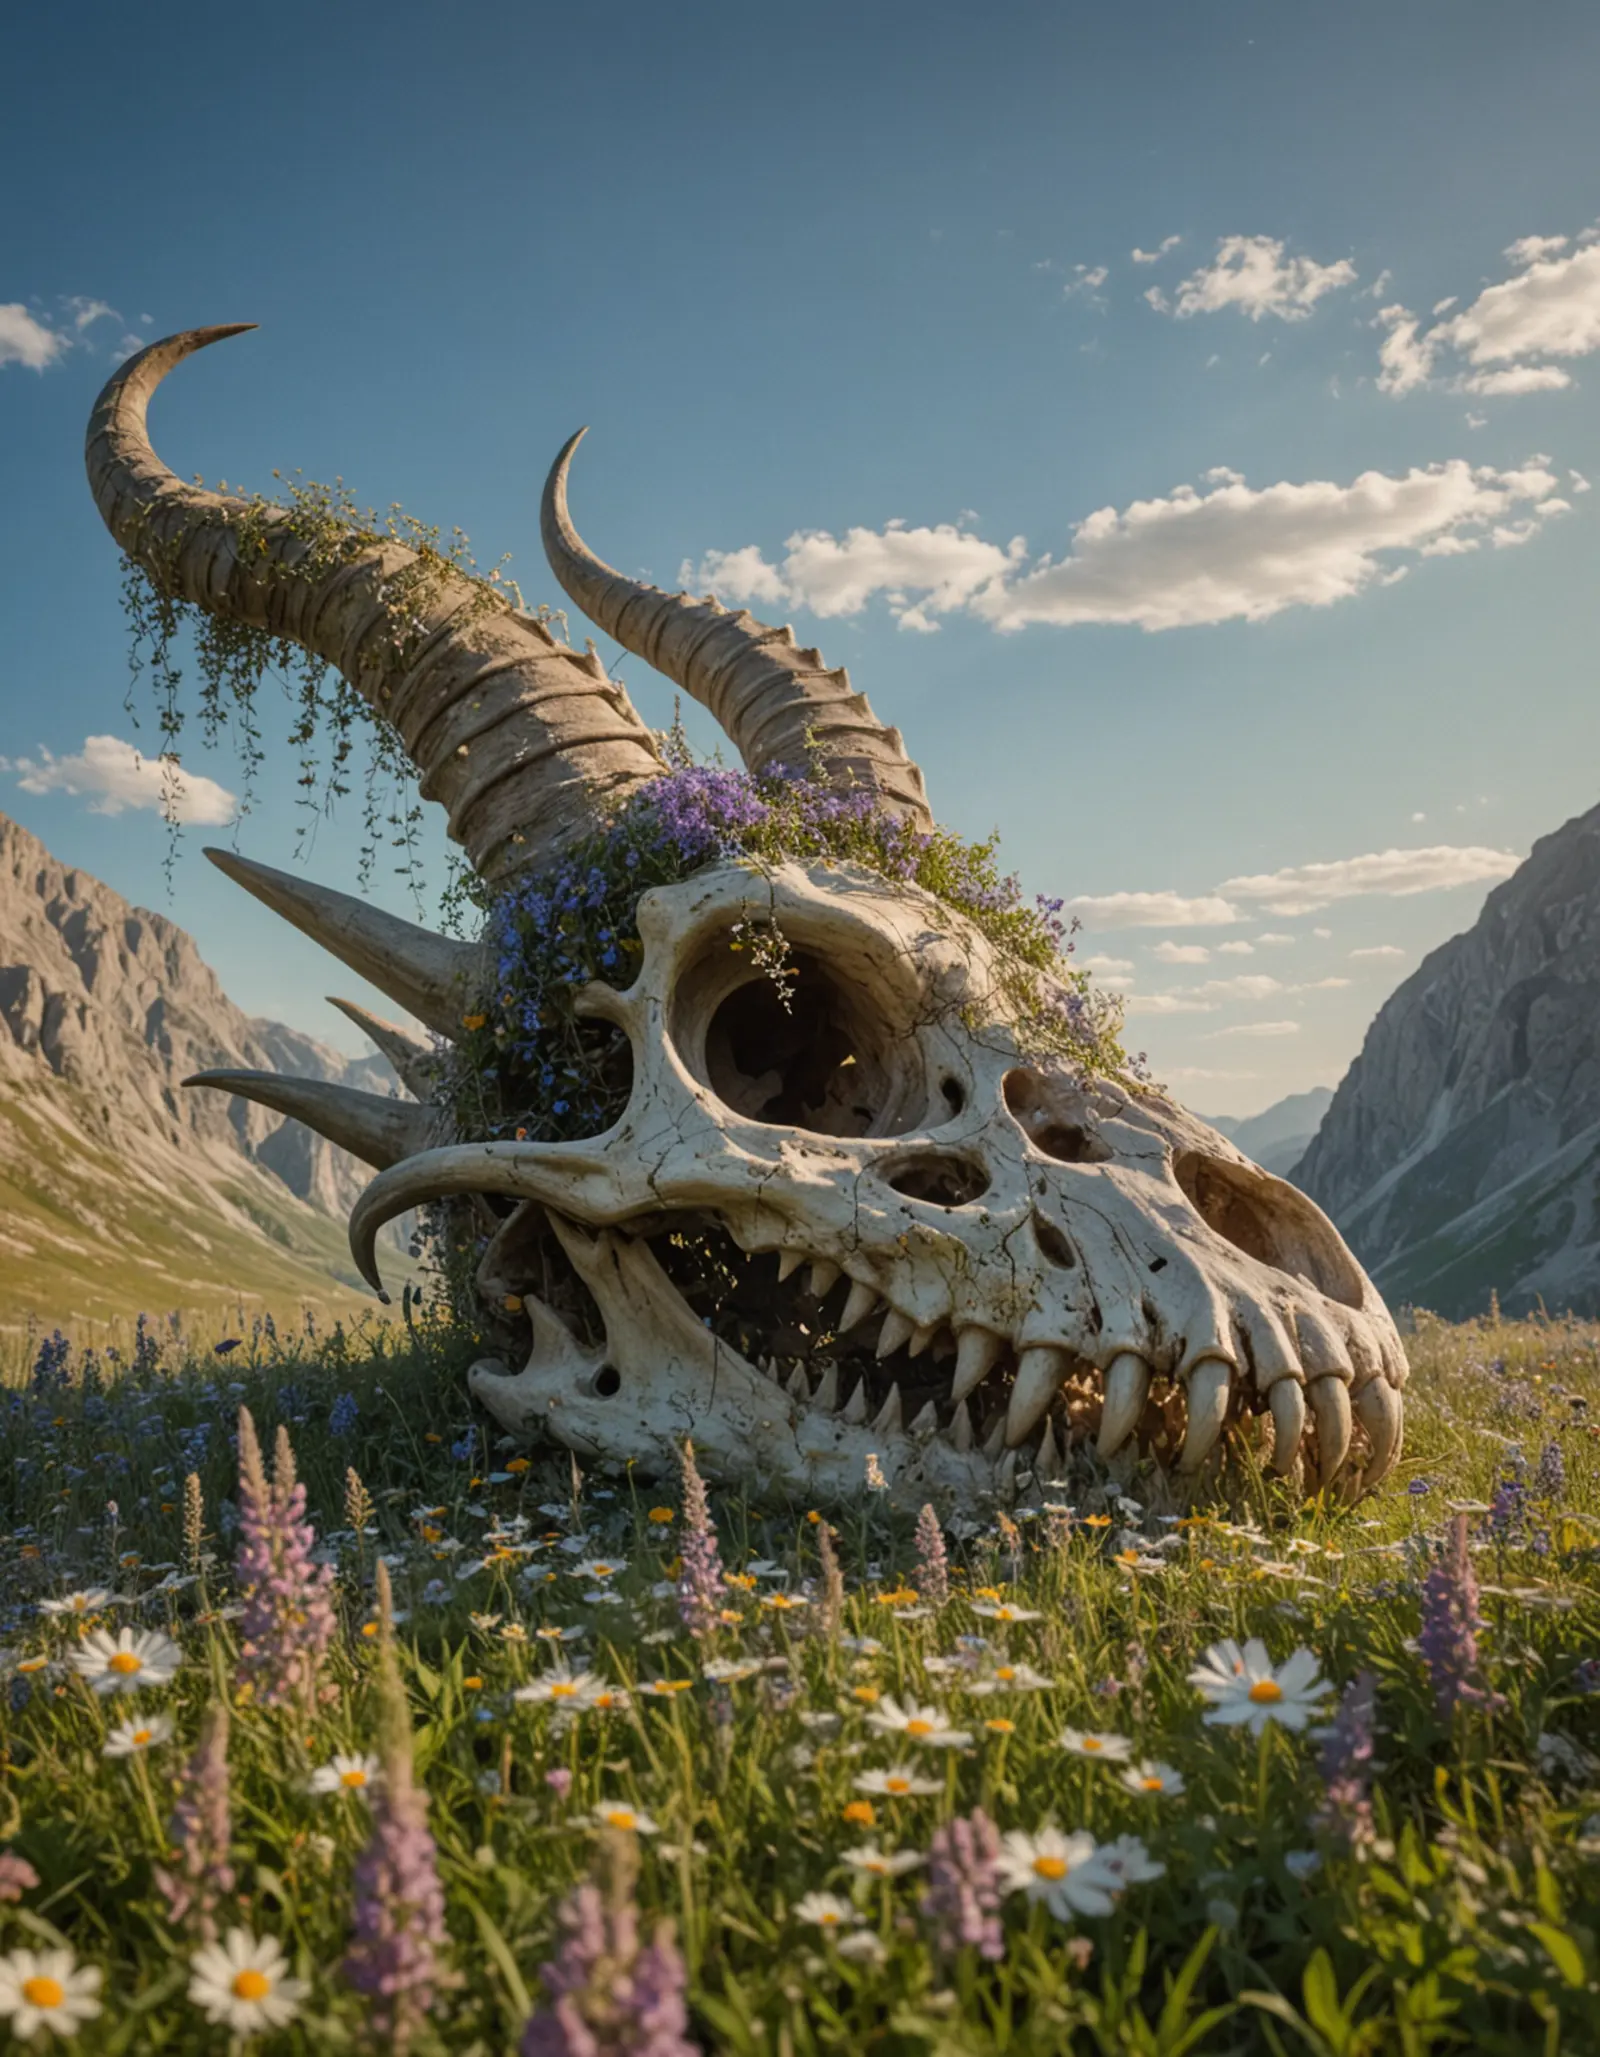 An enormous animal skull with long, curved horns and sharp teeth lying amidst a field of wildflowers. It's covered with blooming purple flowers, and vines drape over the horns. The background is of a clear blue sky and distant mountains.